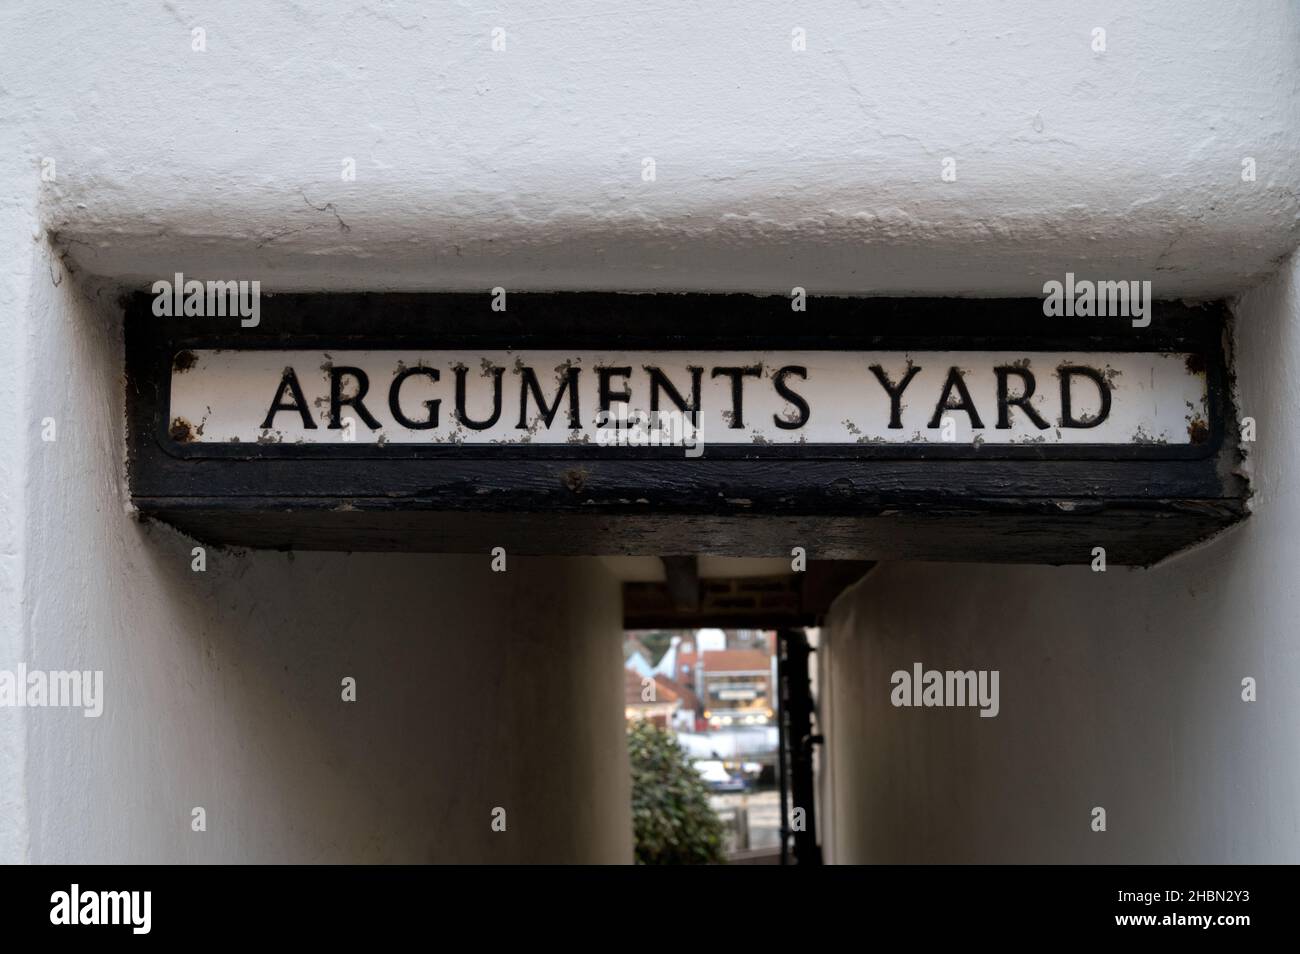 The Strangely-named Arguments Yard, Whitby, North Yorkshire, Reino Unido. Foto de stock